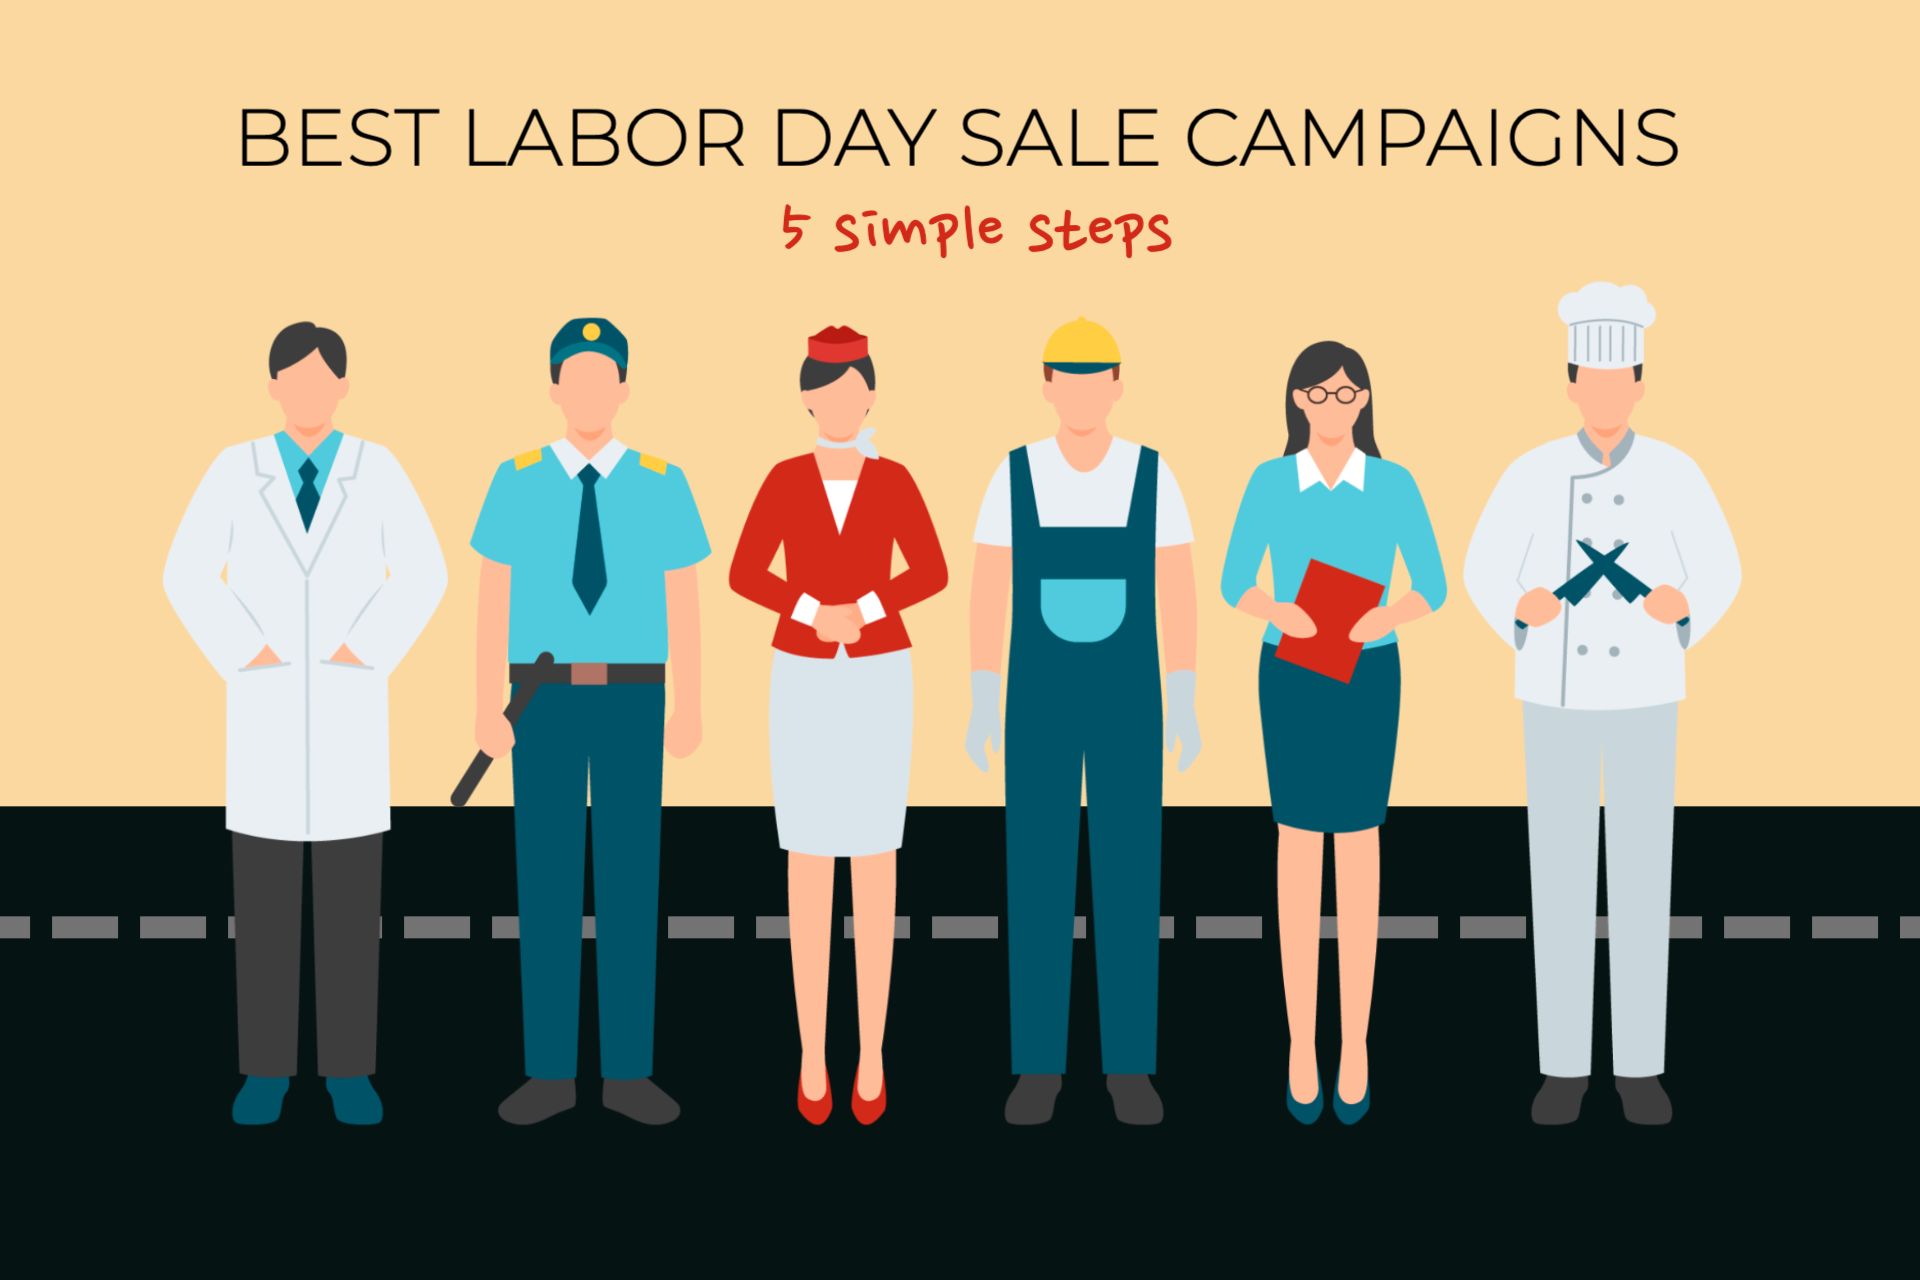 5 Steps to run Best Labor Day Sale campaigns for your Business